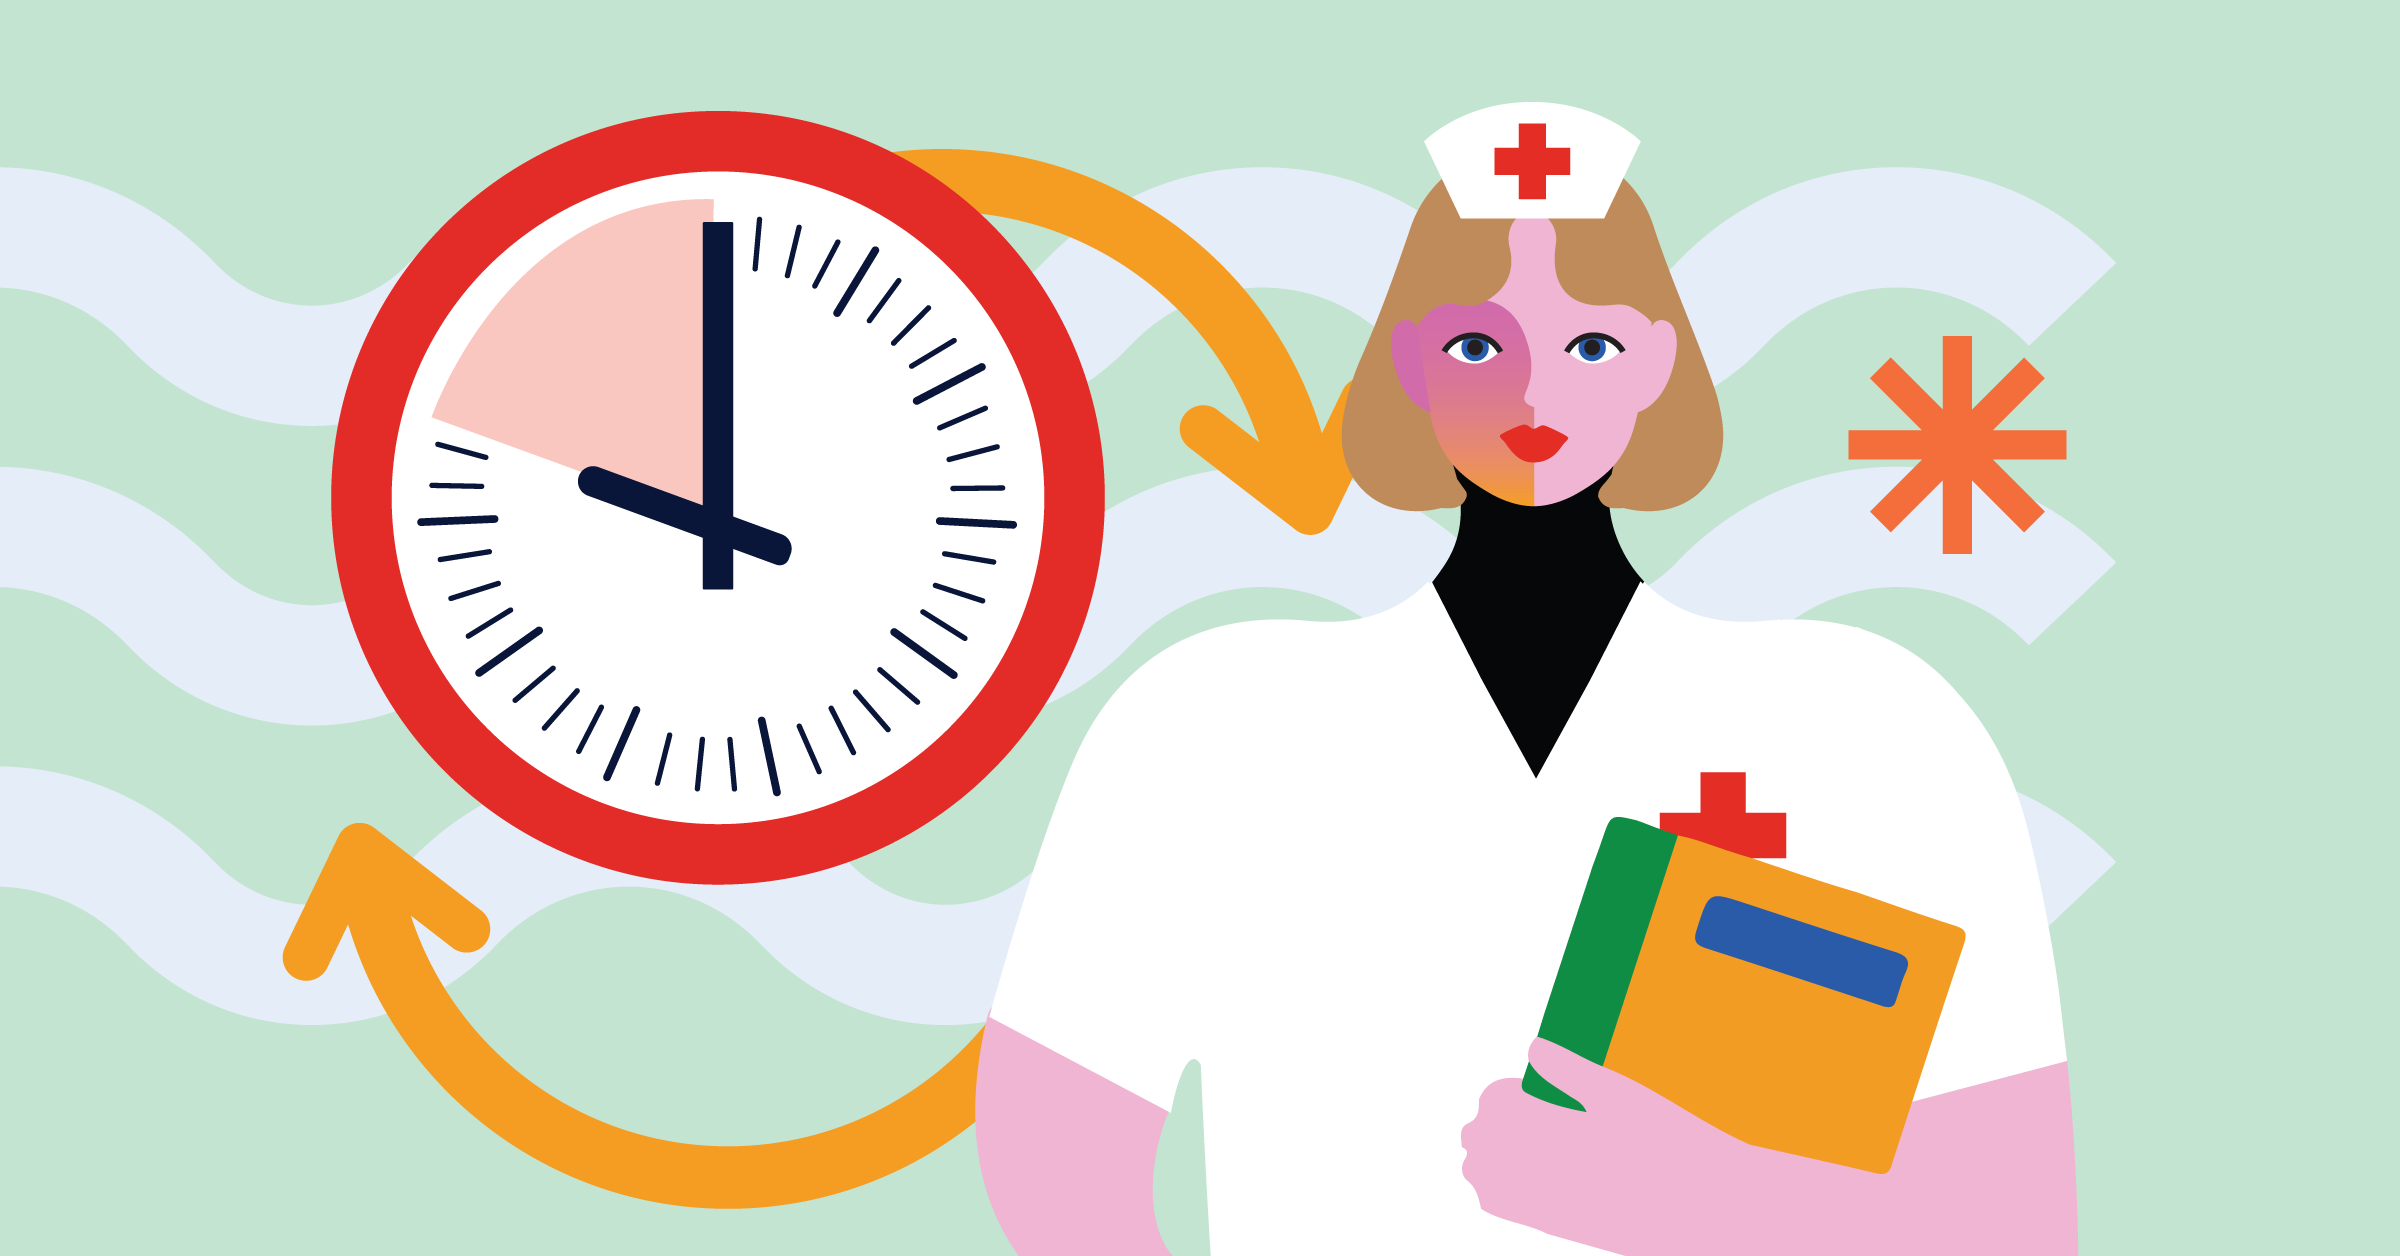 Illustration of a nurse holding a book, standing next to a large clock with arrows indicating the passage of time.